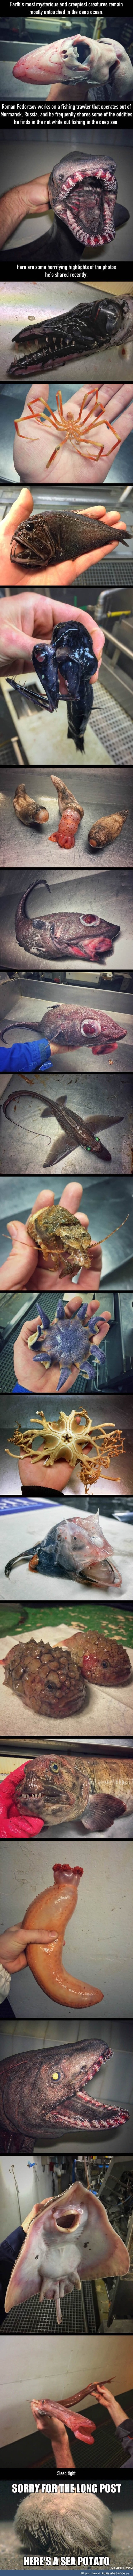 Crazy creatures from the depth of the ocean